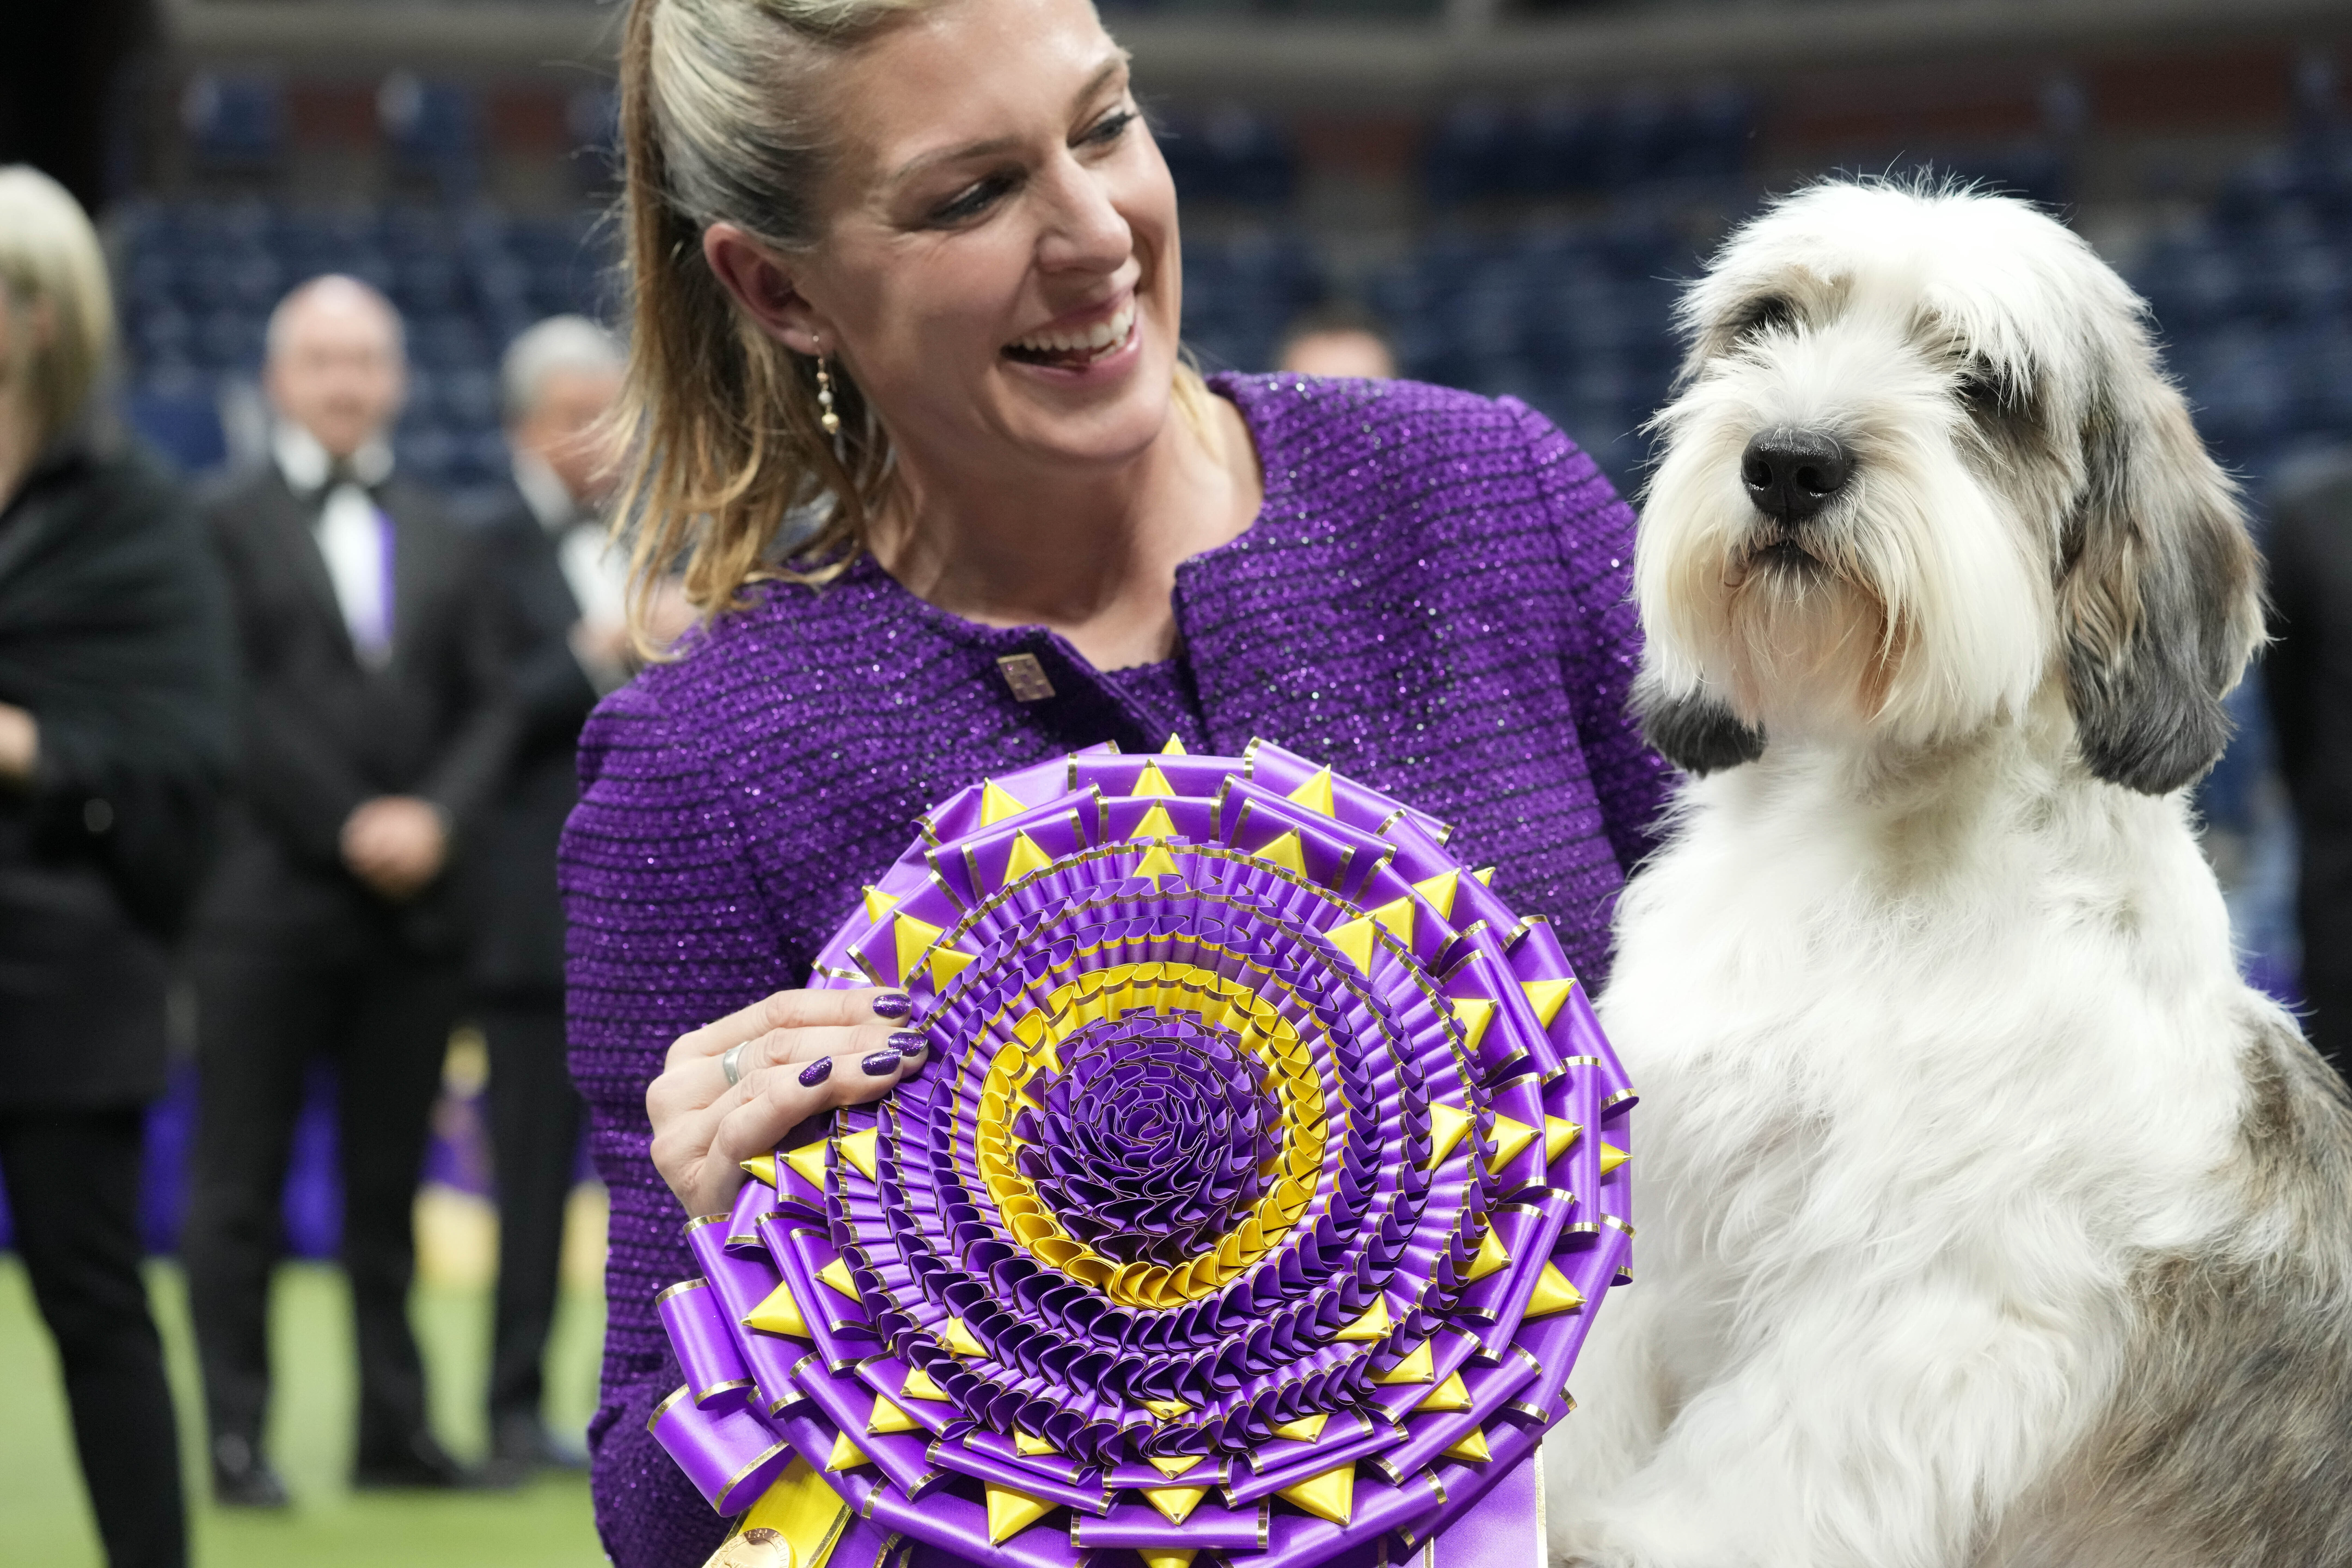 PHOTOS: Canines shine at 147th annual Westminster dog show